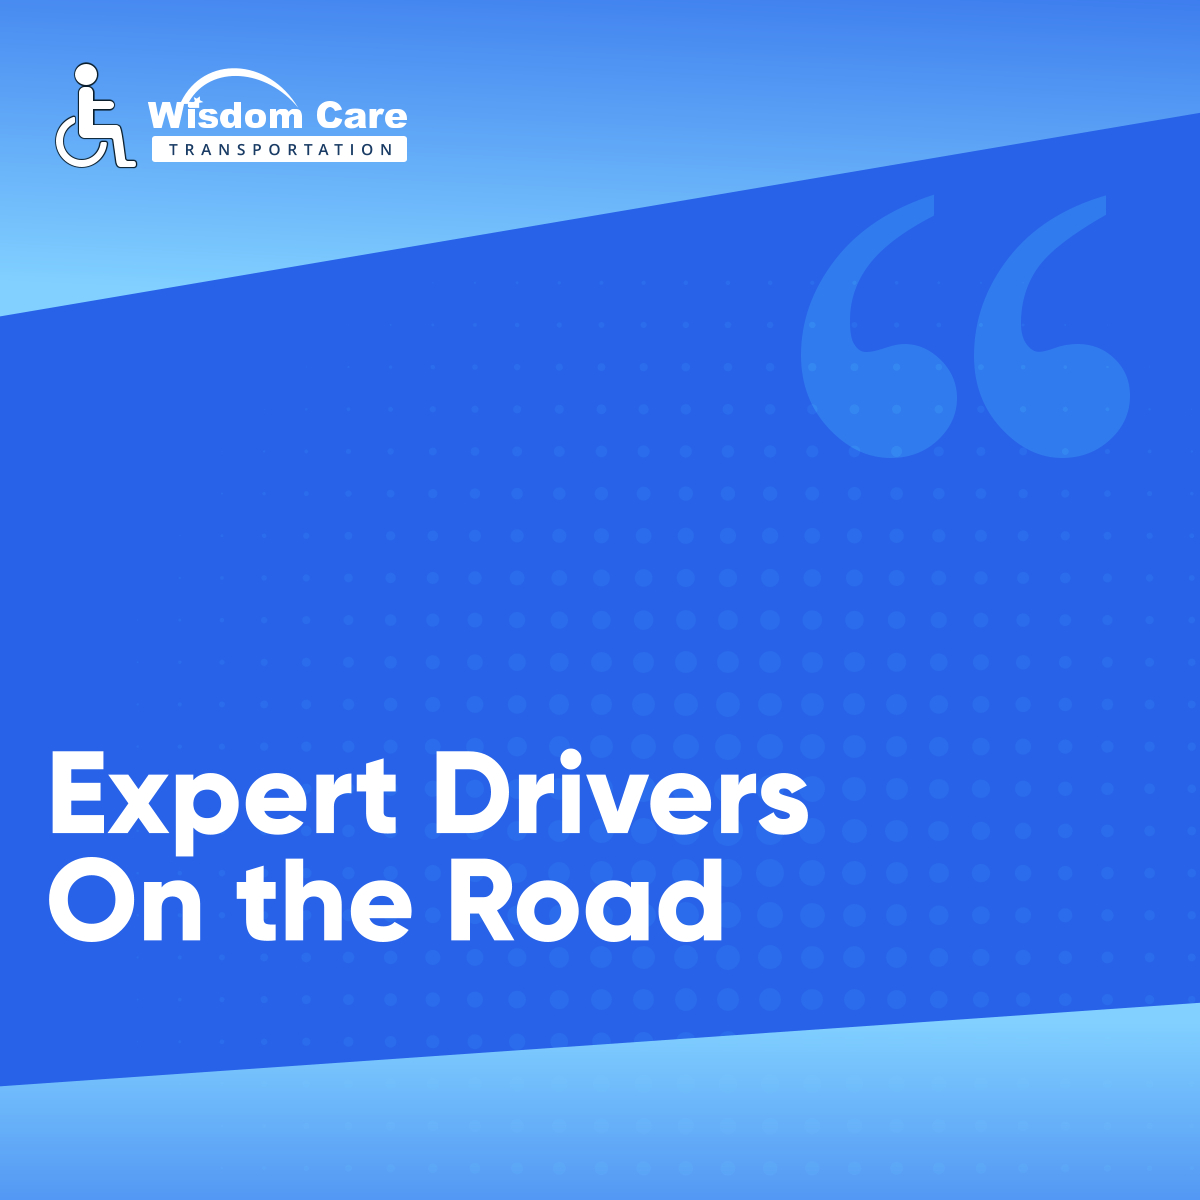 Patient safety while driving to the destination, whether to the clinic or hospital, should come from expert drivers. You must take the opportunity to find the company that offers that transport with expert drivers. Send us a message today.

#ExpertDrivers #NEMTServices